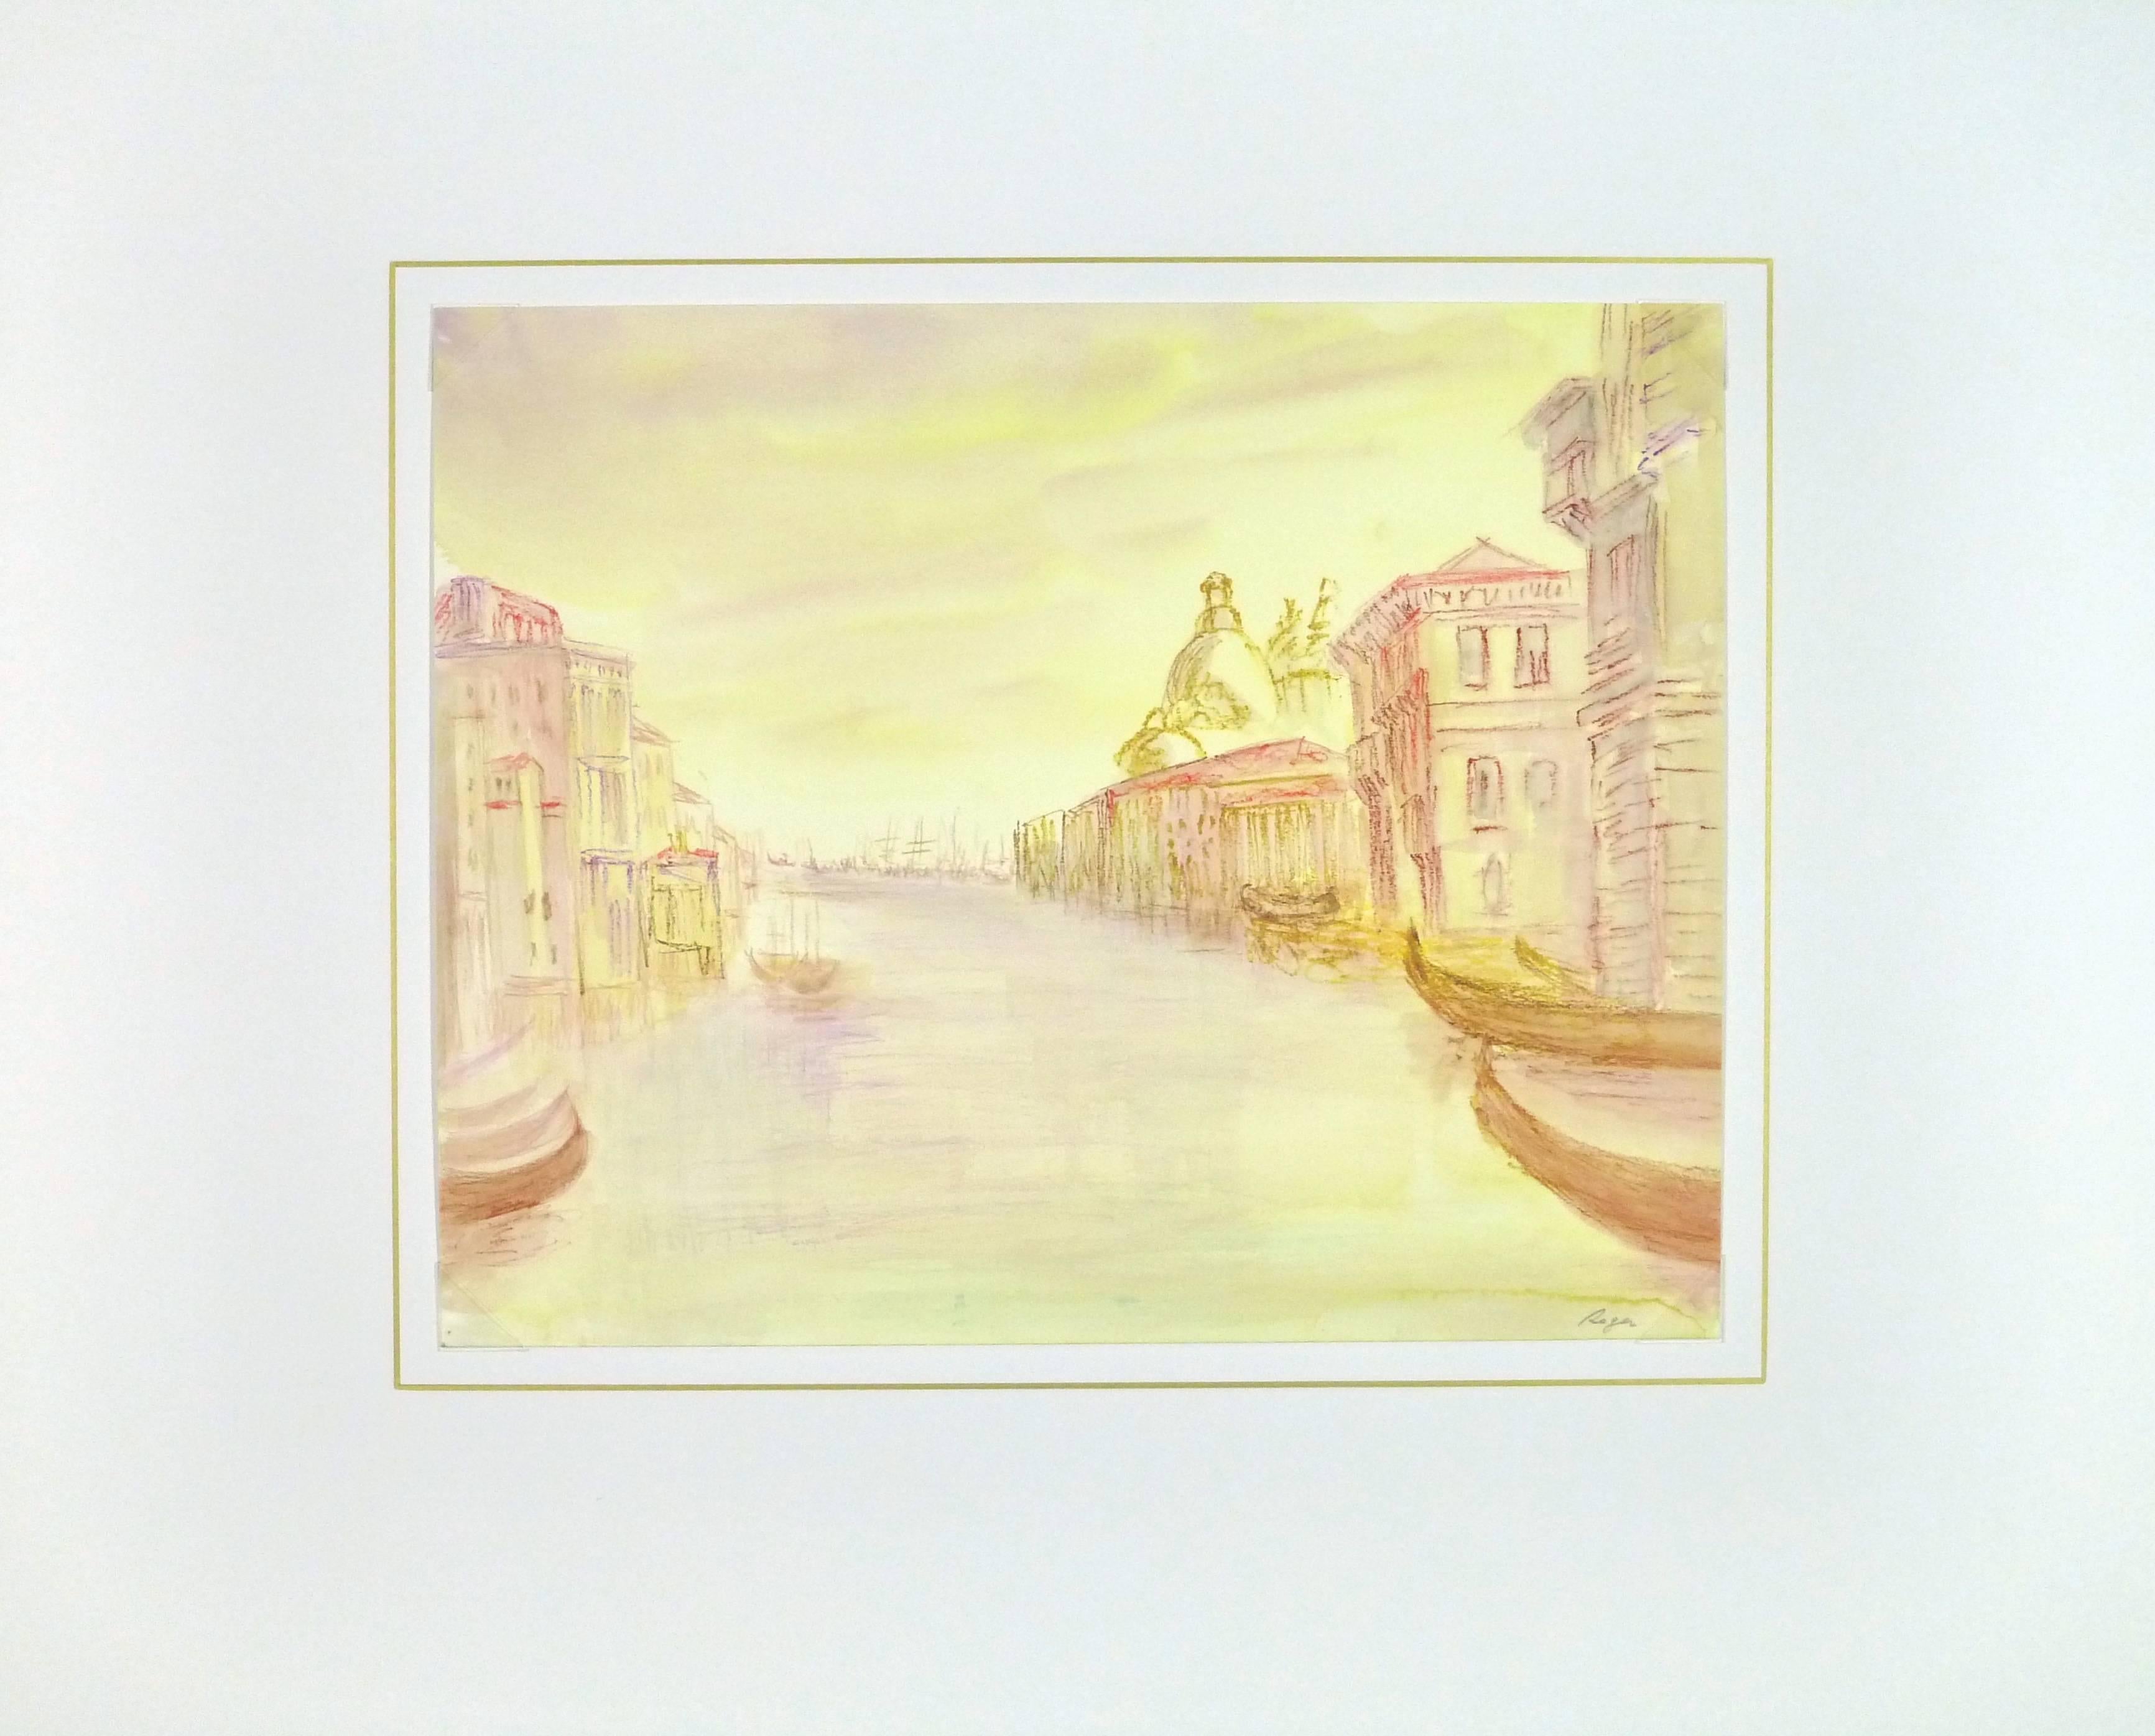 Inviting pastel and watercolor landscape of the canals of venice in warm and sunny hues reminiscent of a early morning sunrise by Roger, circa 1960. Signed lower right.

Original one-of-a-kind artwork on paper displayed on a white mat with a gold